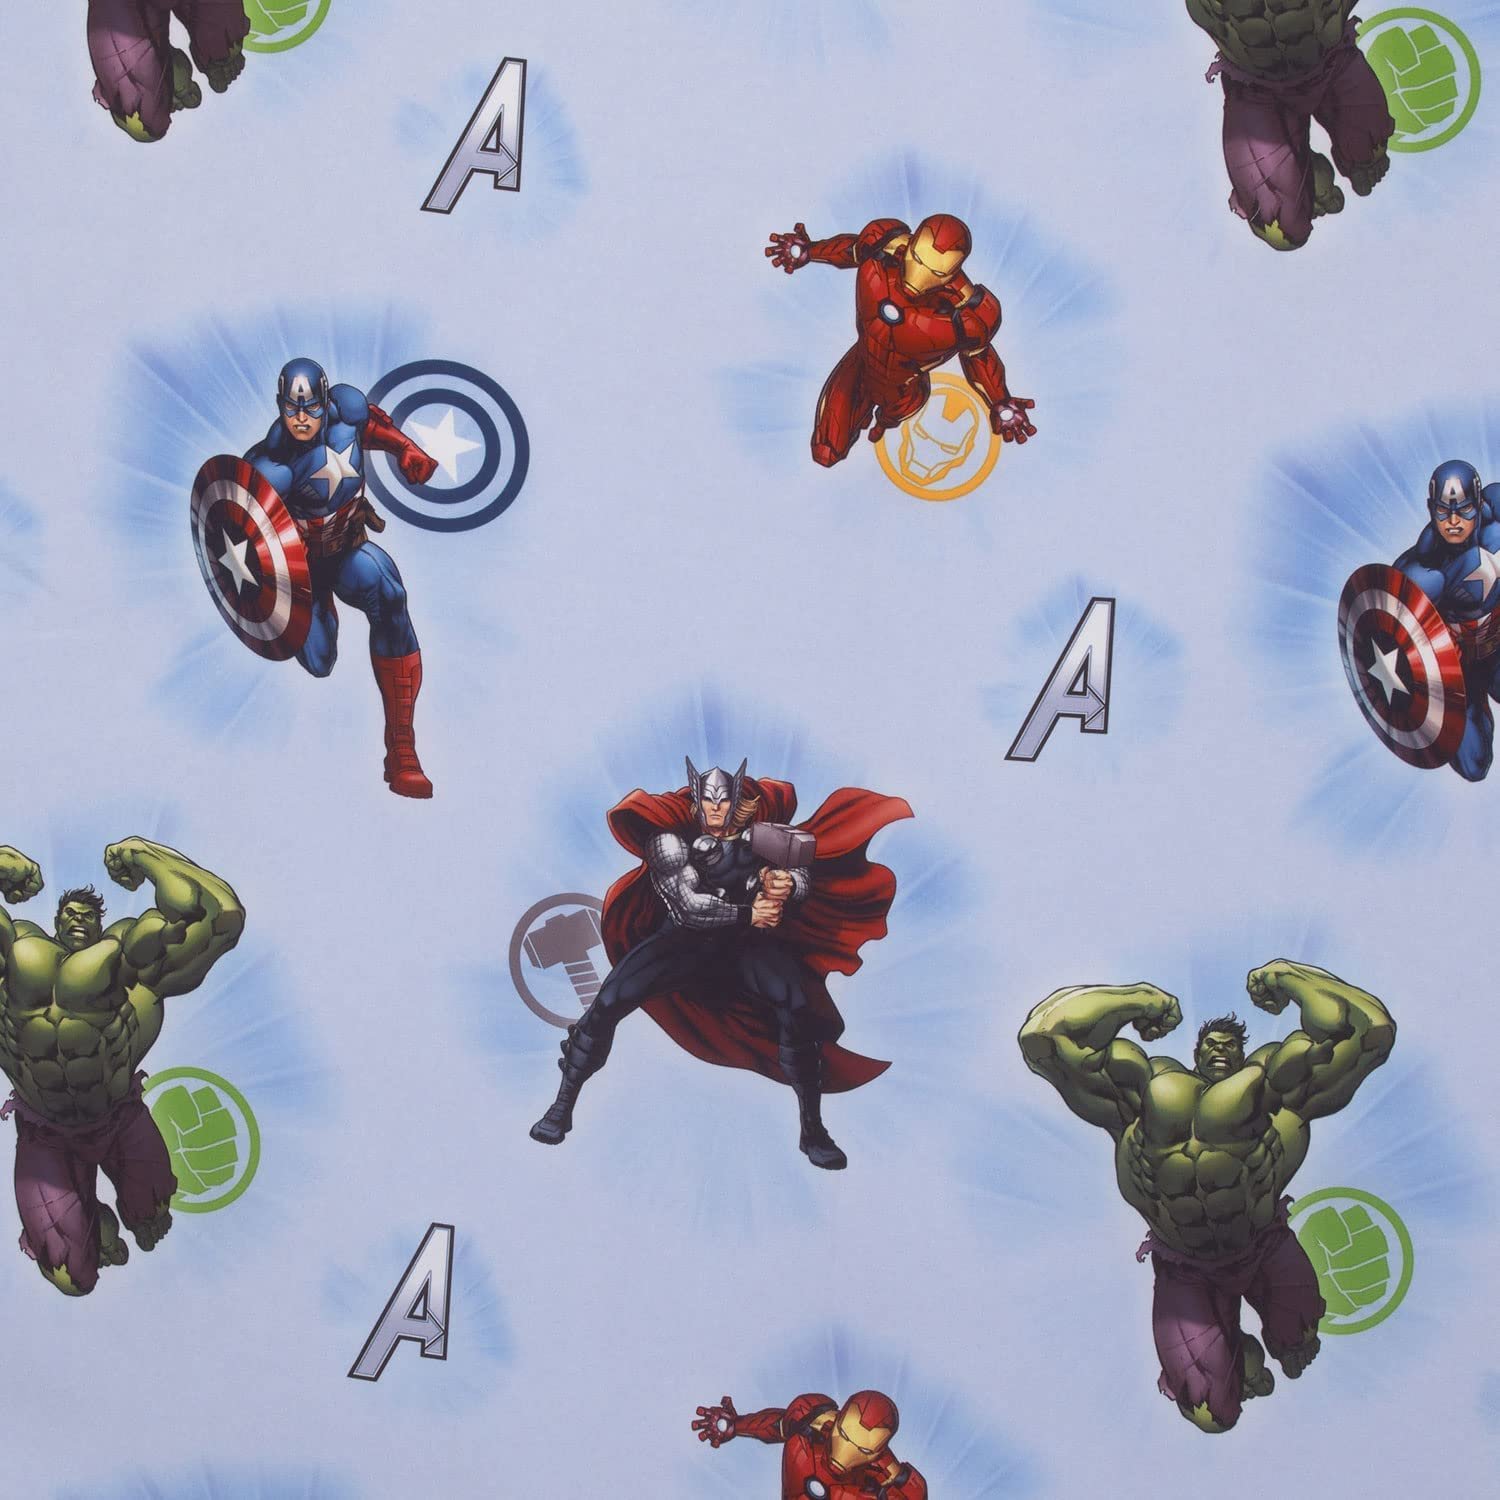 Marvel Avengers Fitted Crib Sheet 100% Soft Microfiber, Baby Sheet, Fits Standard Size Crib Mattress 28in x 52in - image 4 of 4